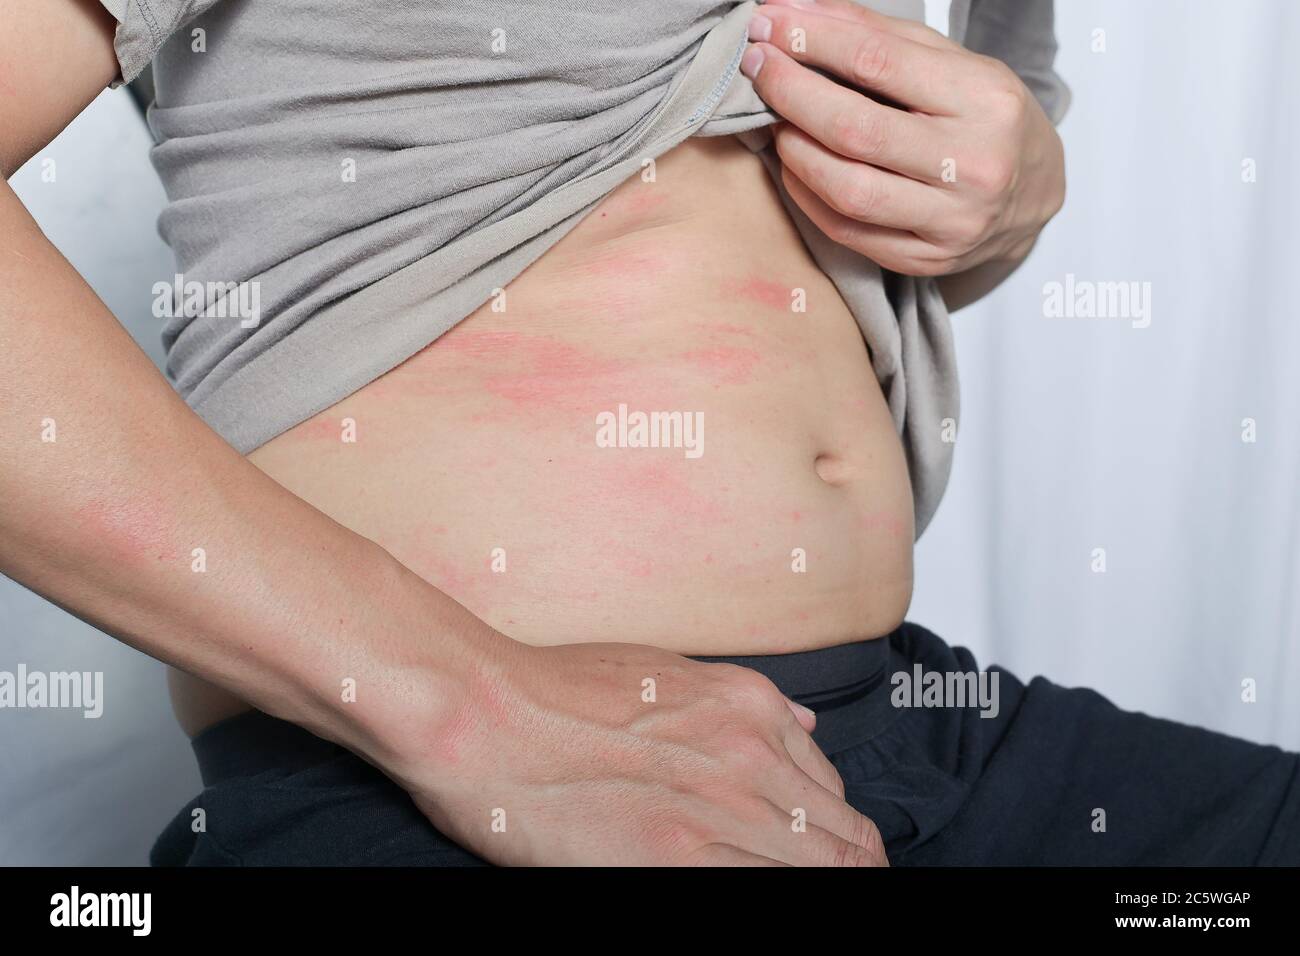 Allergy is a red rash on the body is Rash caused by a Caterpillar Stock Photo